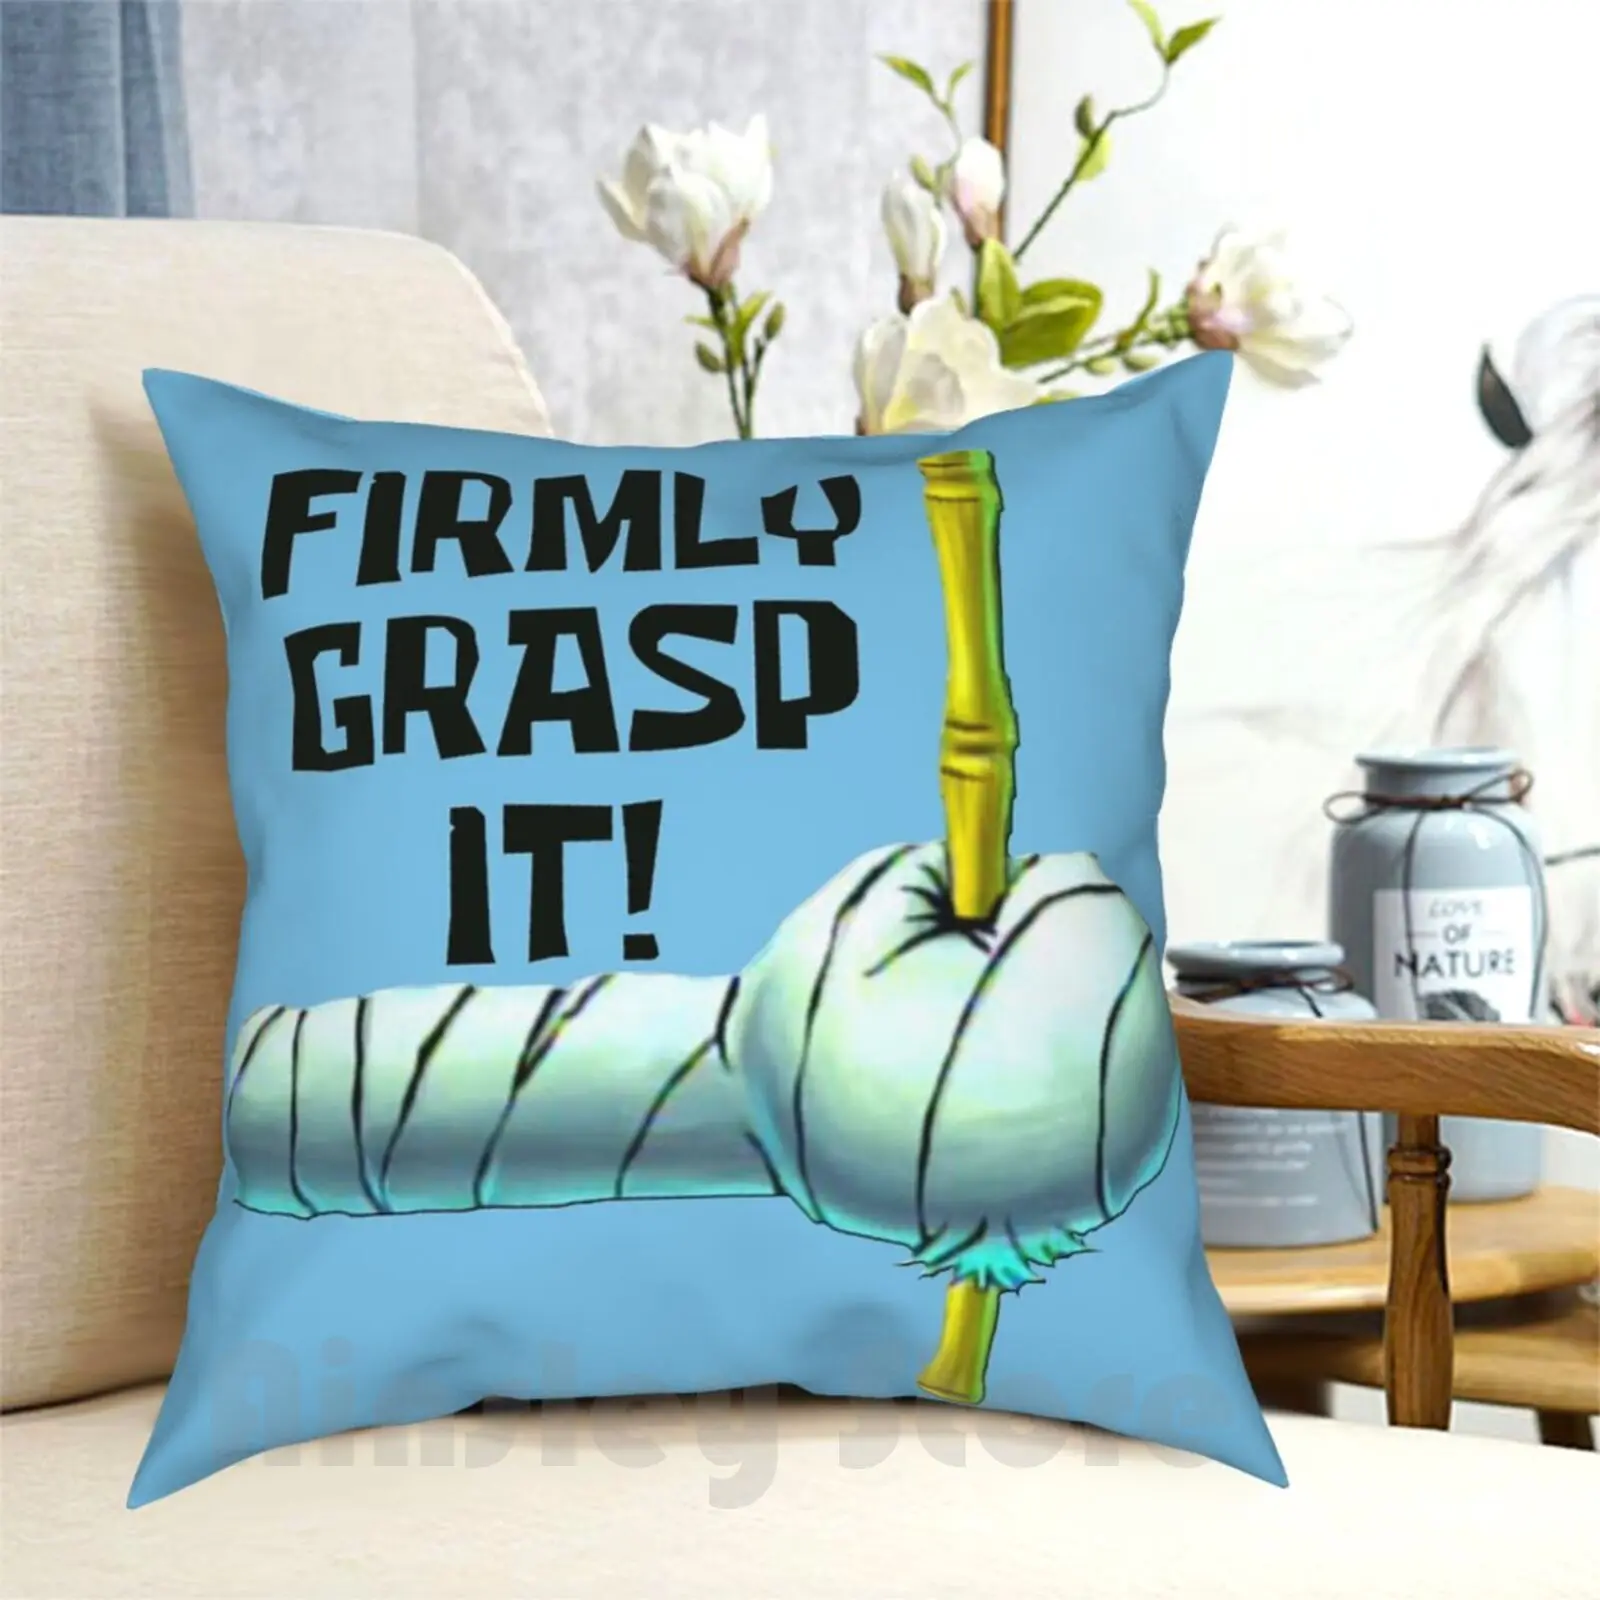 Firmly Grasp It! Pillow Case Printed Home Soft DIY Pillow co